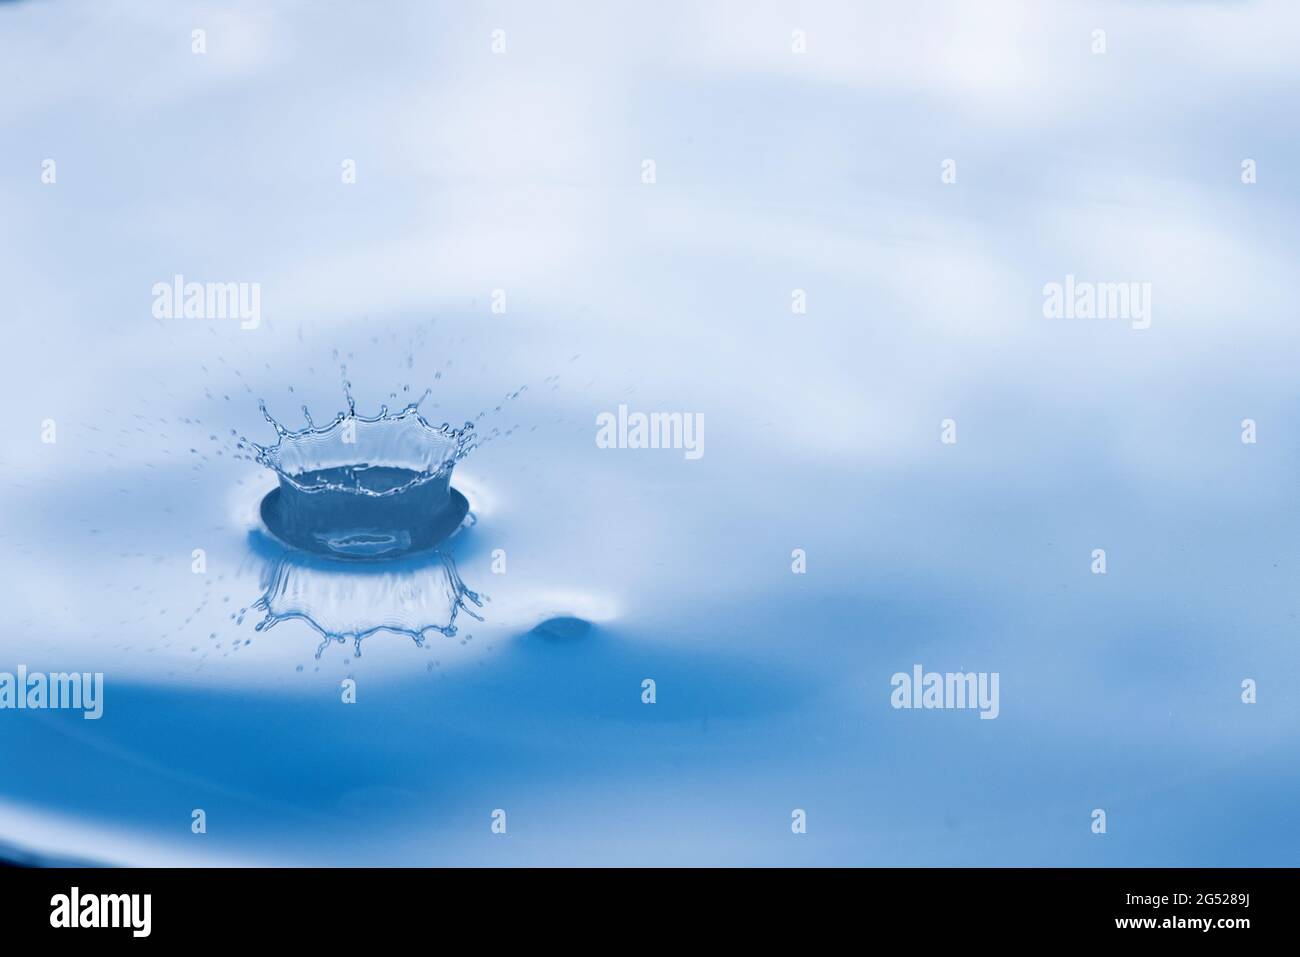 Water drop splash with reflection. Stock Photo